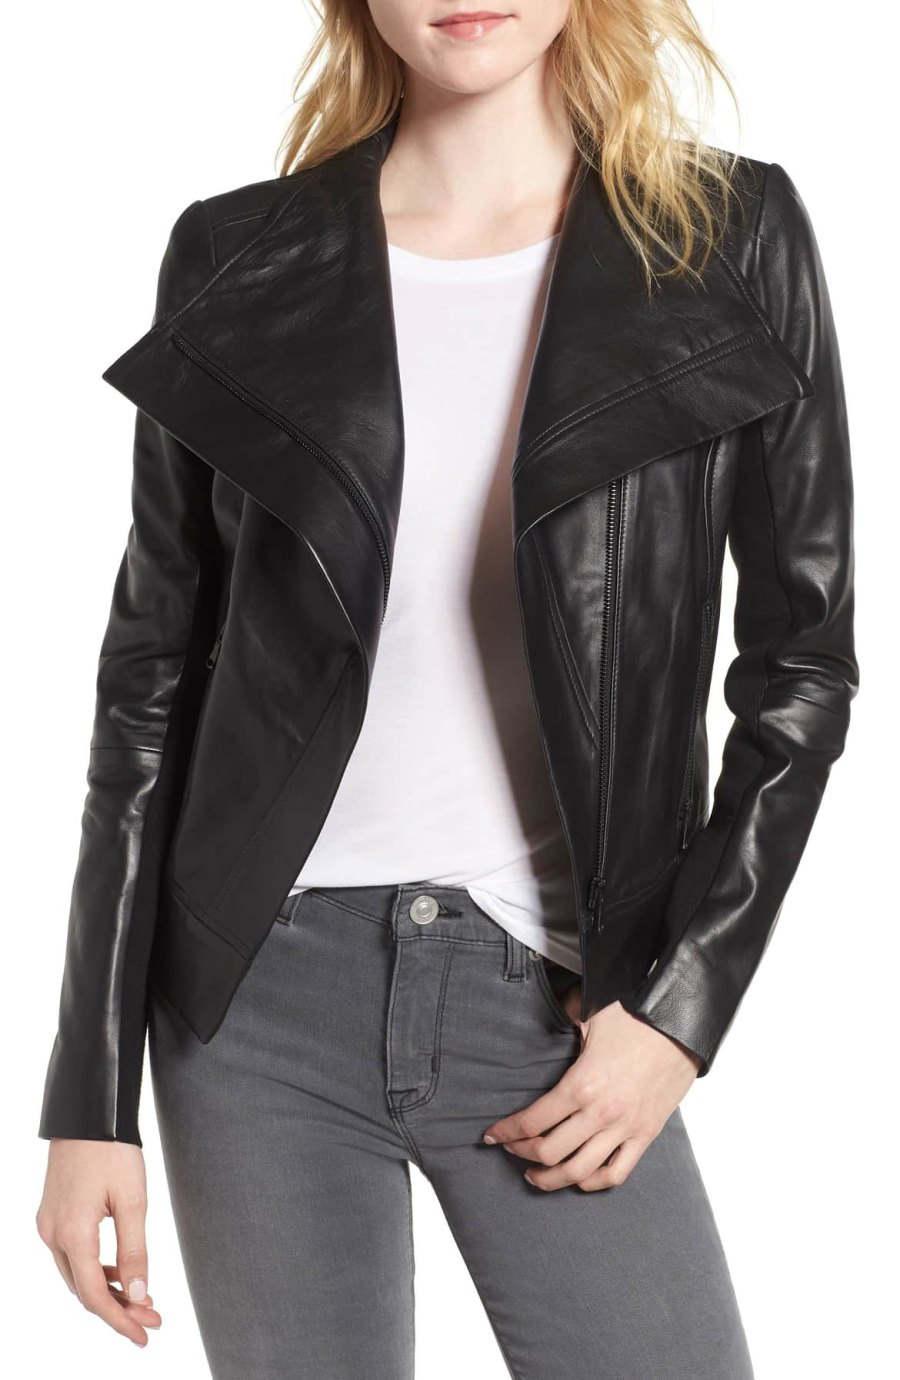 Shop This Lambskin Leather Jacket Over $100 at Nordstrom | Us Weekly